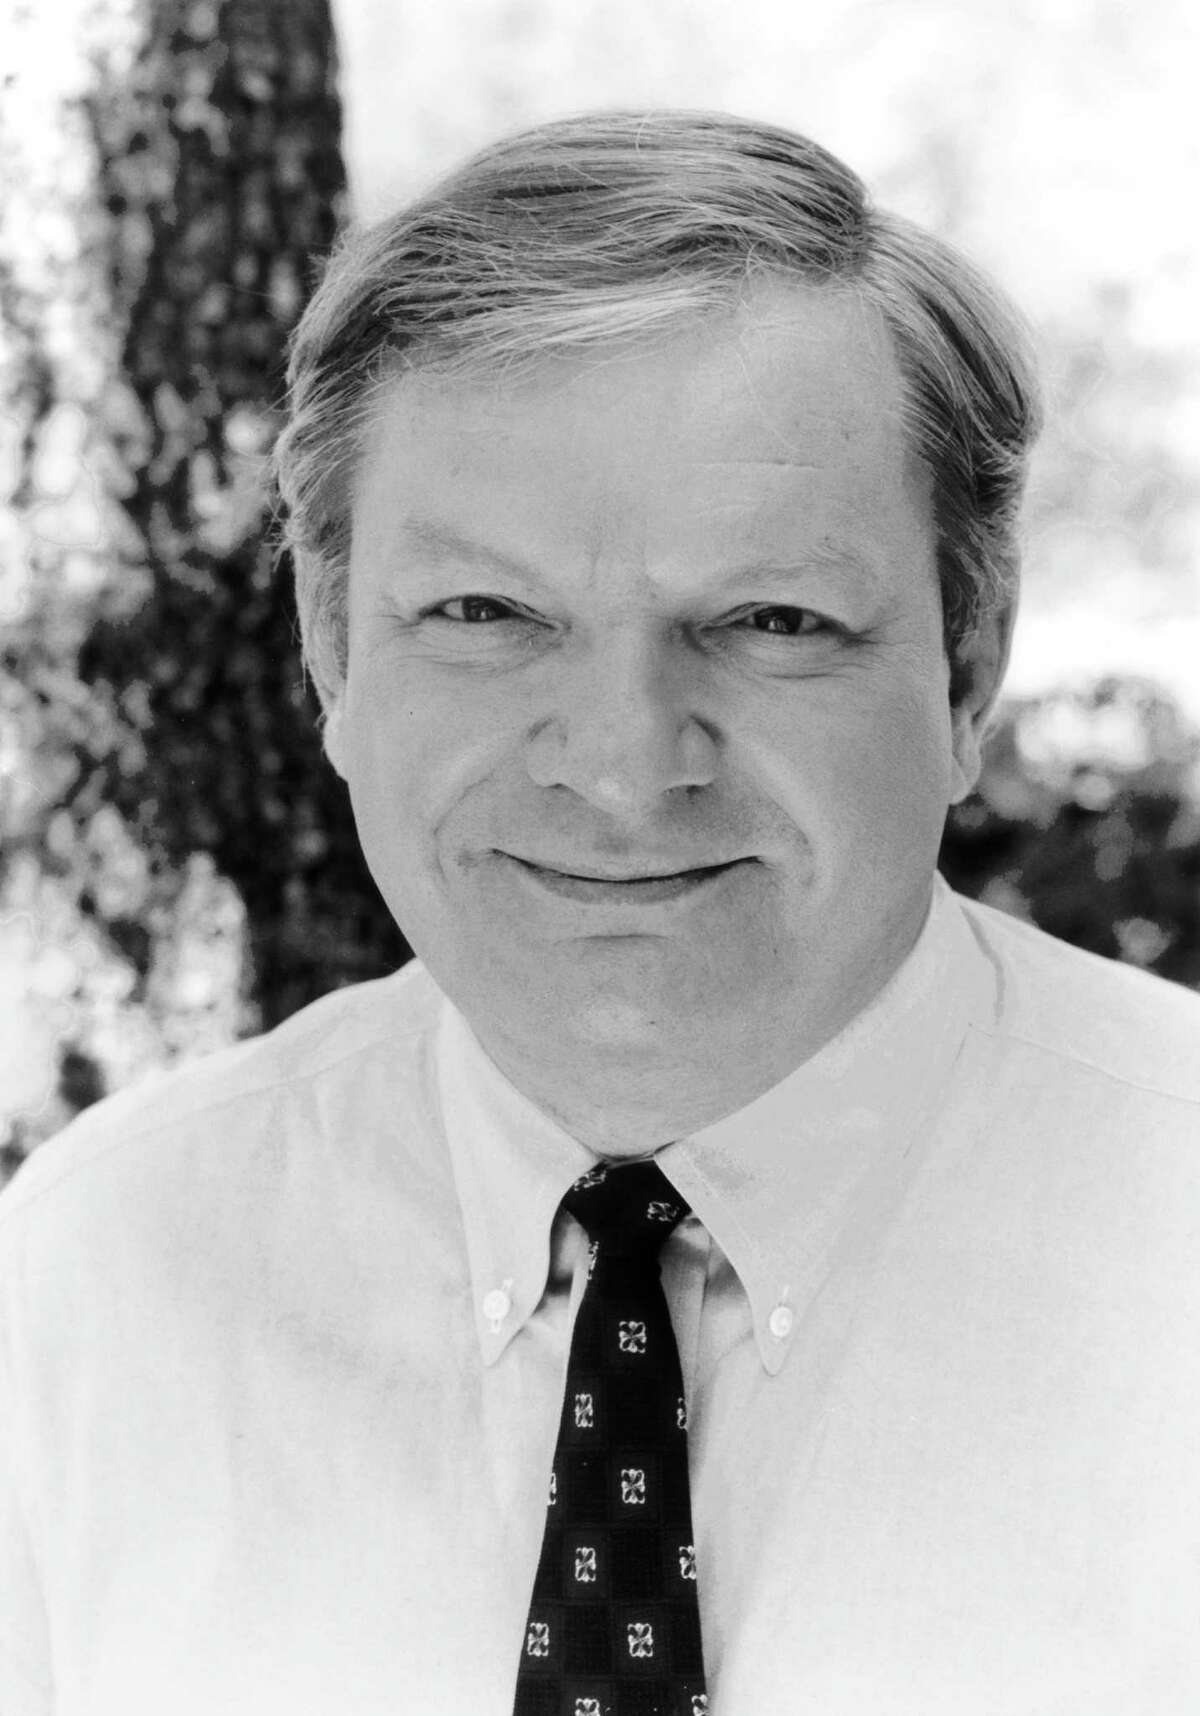 STEVE RADACK - HARRIS COUNTY COMMISSIONER PCT. 3. GOP 2000. HOUCHRON CAPTION (03/05/2000): Steve Radack HOUSTON CHRONICLE SPECIAL SECTION: VOTER'S GUIDE/PRIMARY MARCH 2000. HOUCHRON CAPTION (03/15/2000): Radack. HOUSTON CHRONICLE SPECIAL SECTION: CAMPAIGN 2000. HOUCHRON CAPTION (04/26/2000): None. HOUCHRON CAPTION (12/09/2000): Radack. HOUCHRON CAPTION (03/19/2001): County Commissioner Steve Radack says this is "a classic example of the city wanting total control." HOUCHRON CAPTION (09/05/2001): Precinct 3 Commissioner Steve Radack. HOUCHRON CAPTION (11/15/2001)(12/28/2001)(05/11/2002)(07/13/2002): Radack.